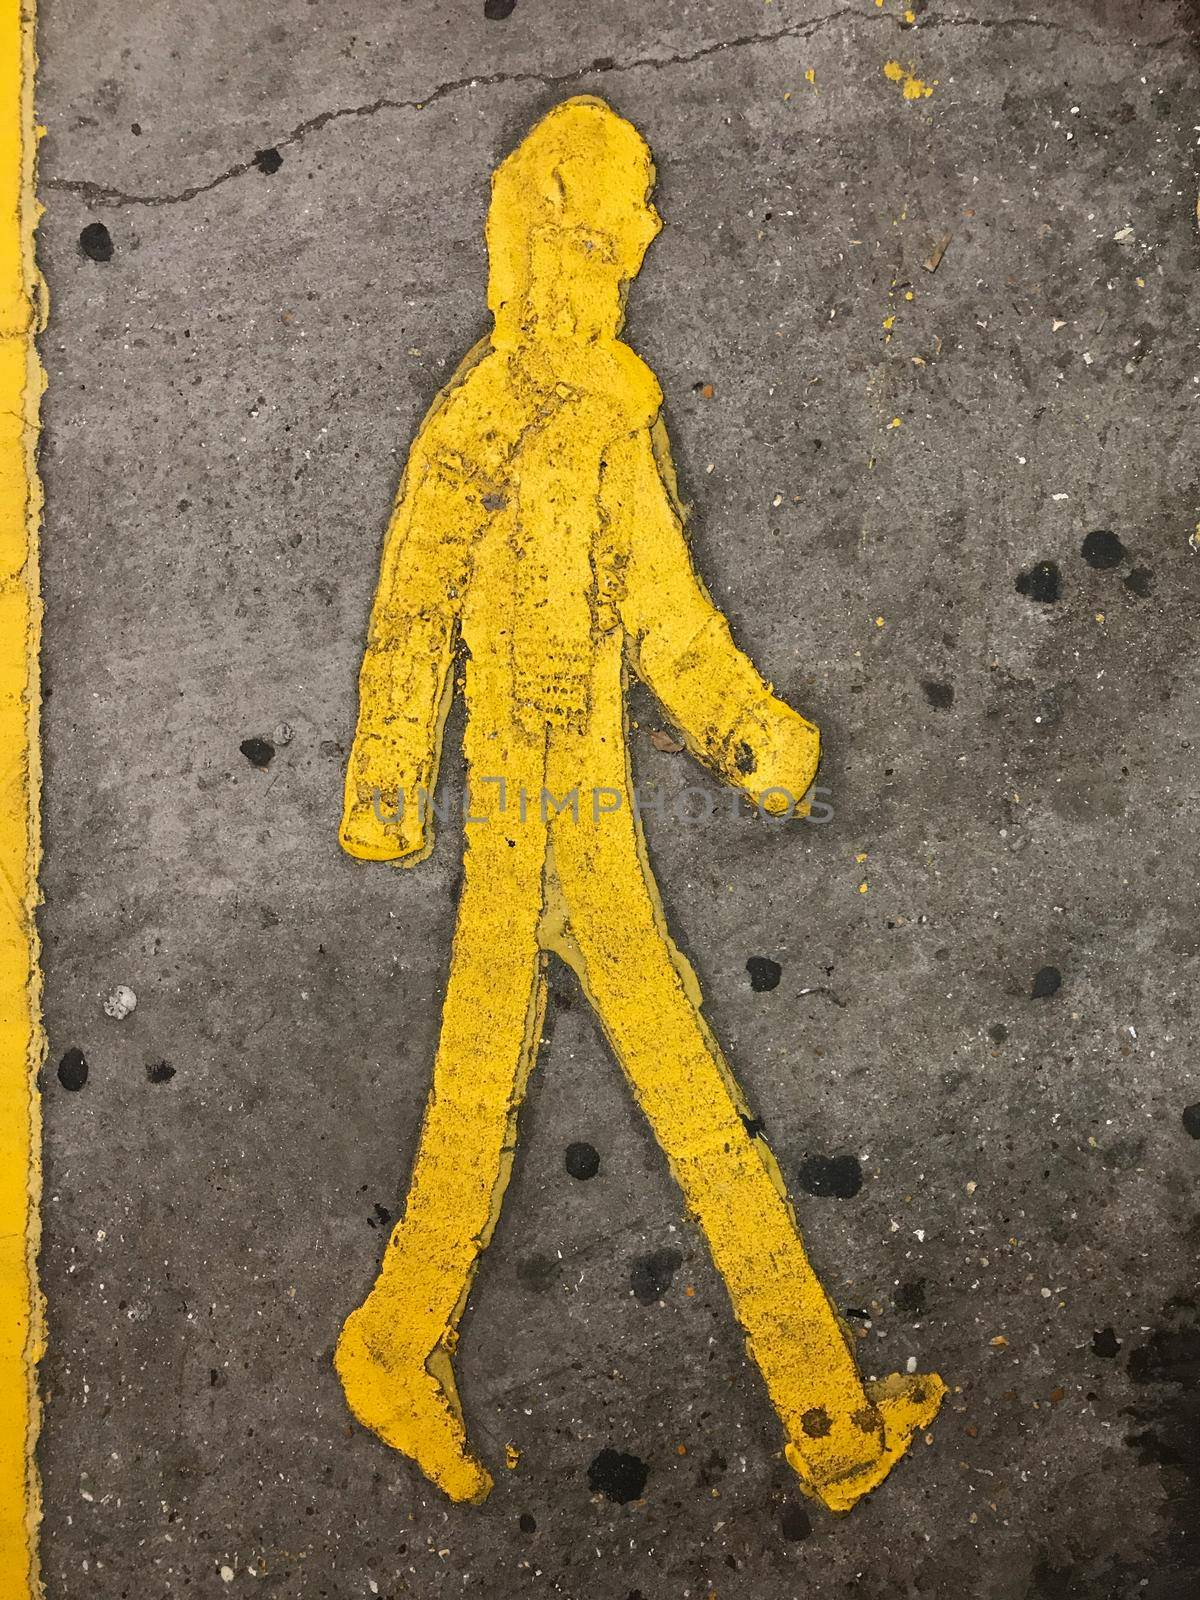 Sign of a yellow person walking on the floor in a parkinglot by LeoniekvanderVliet